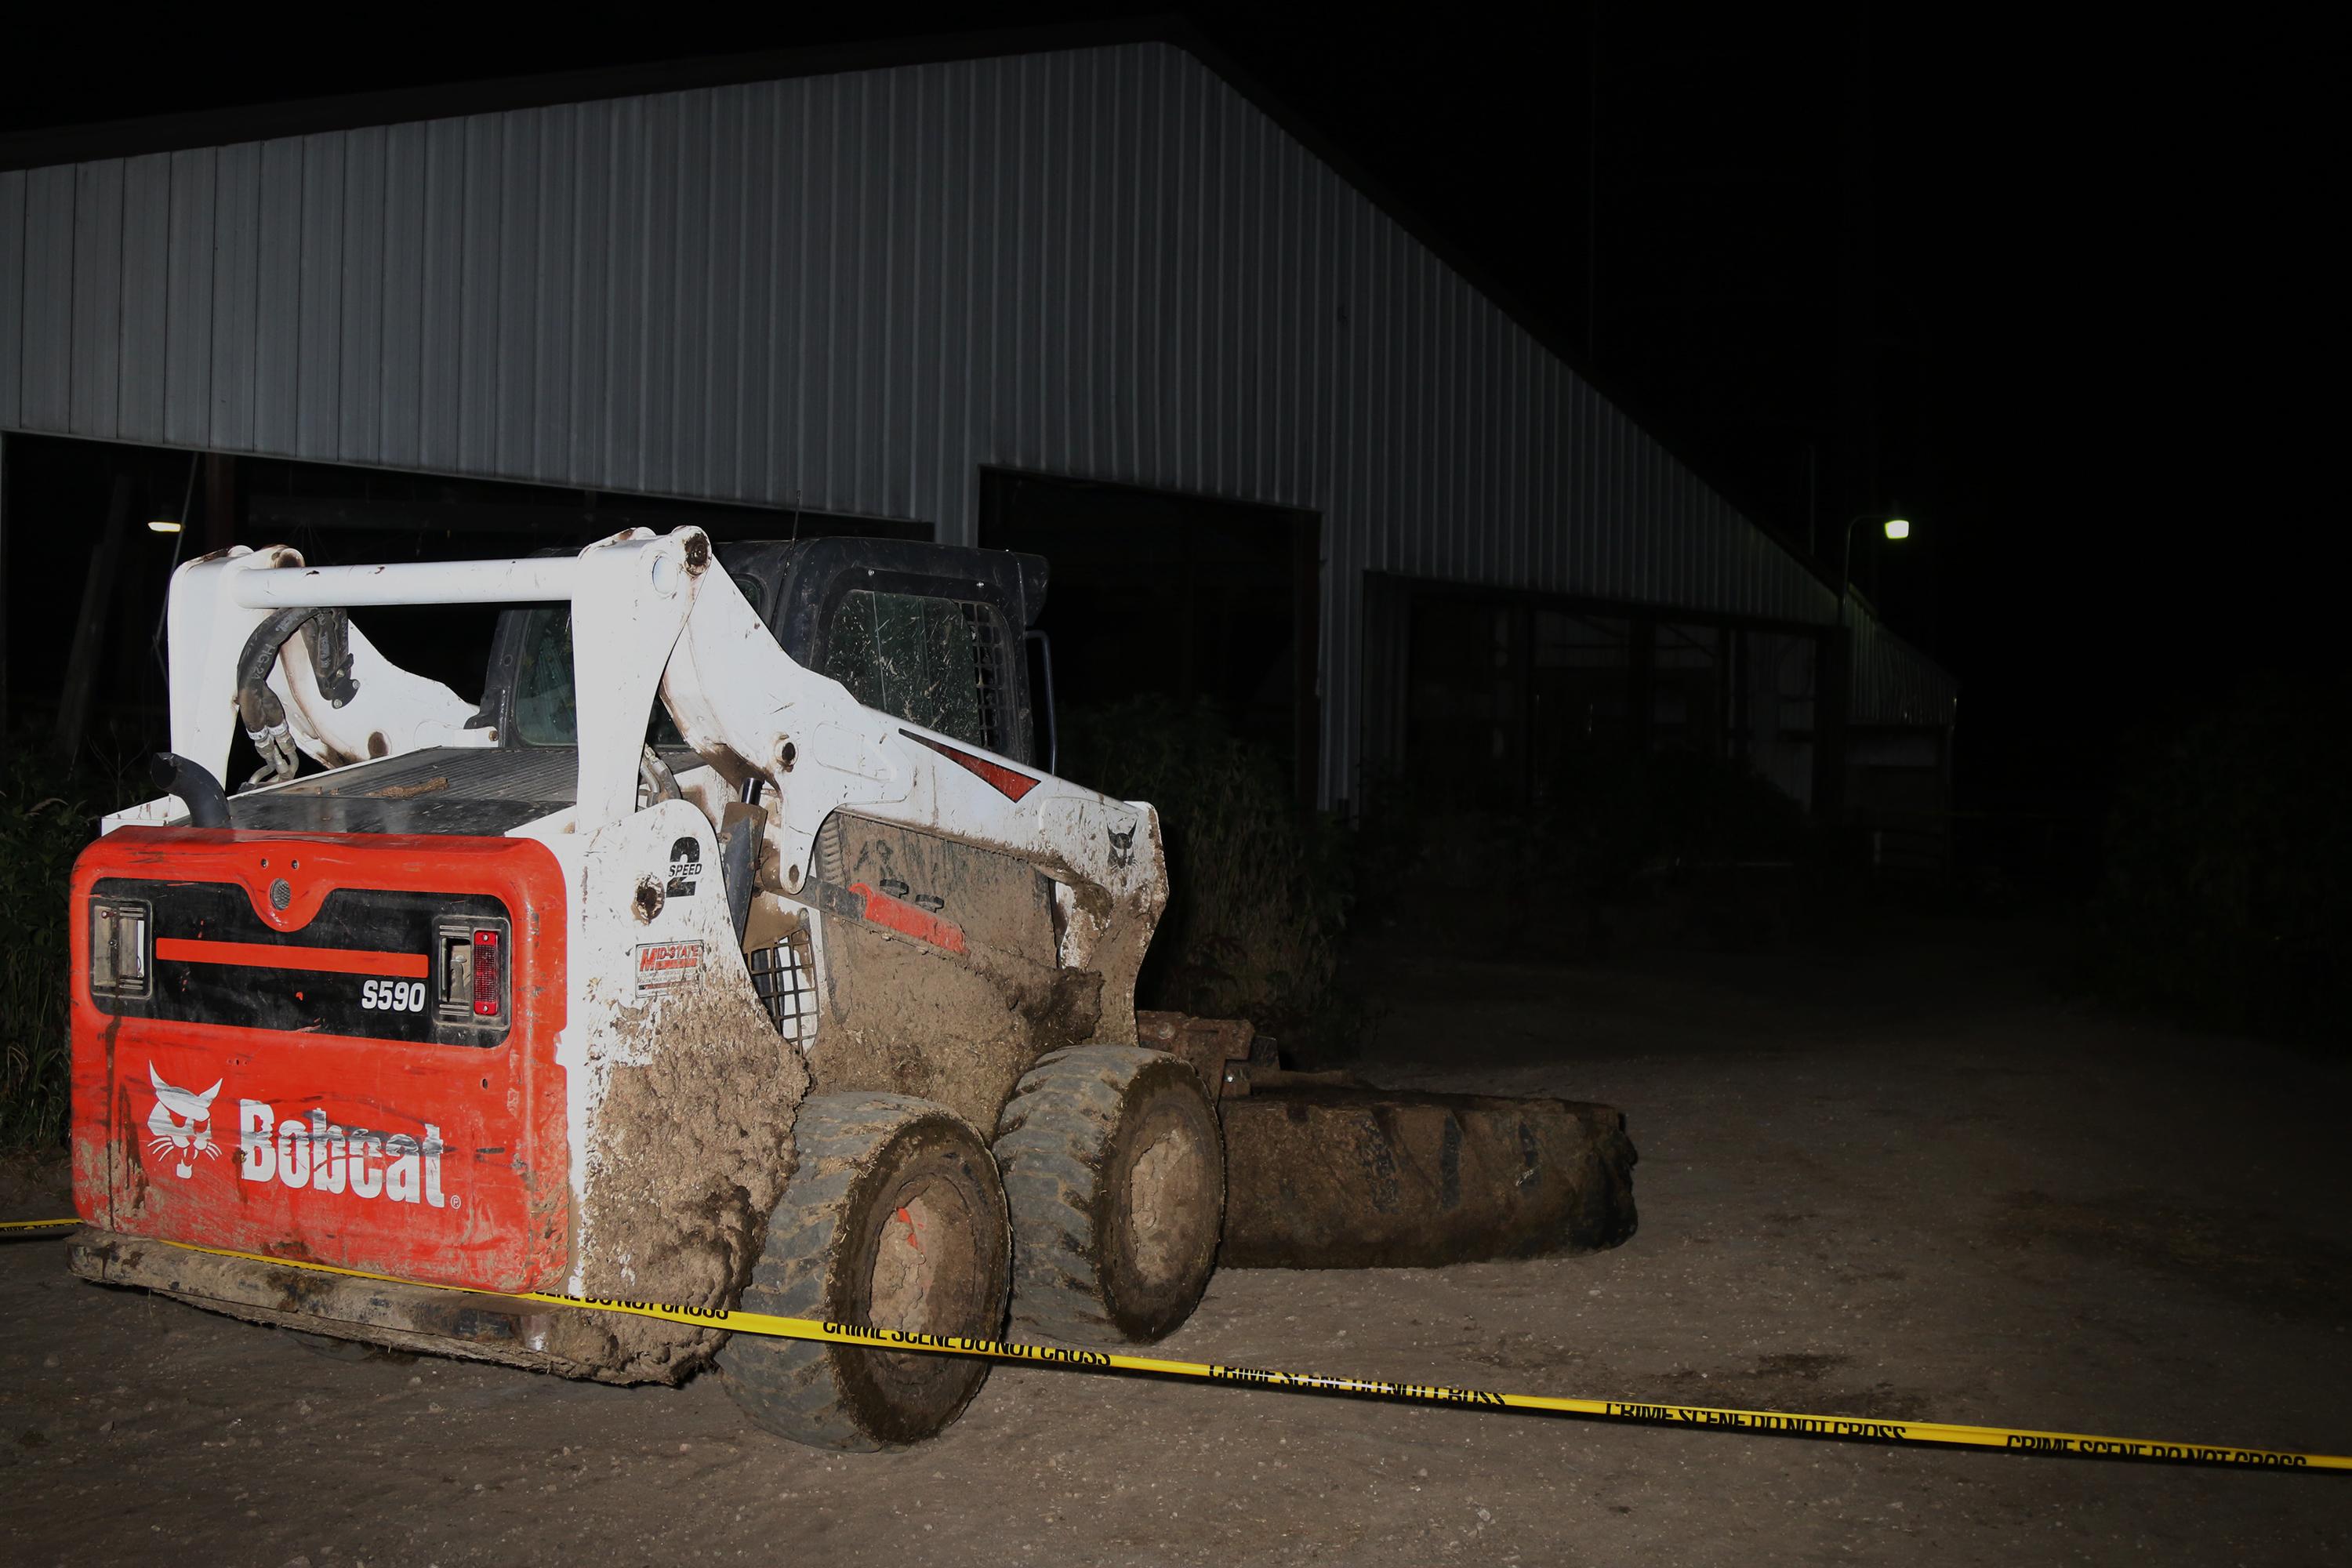 The skid steer that struck Jefferson Rodriguez and caused his death, photographed a few hours after the accident. Photo by El Faro: Dane County Sheriff